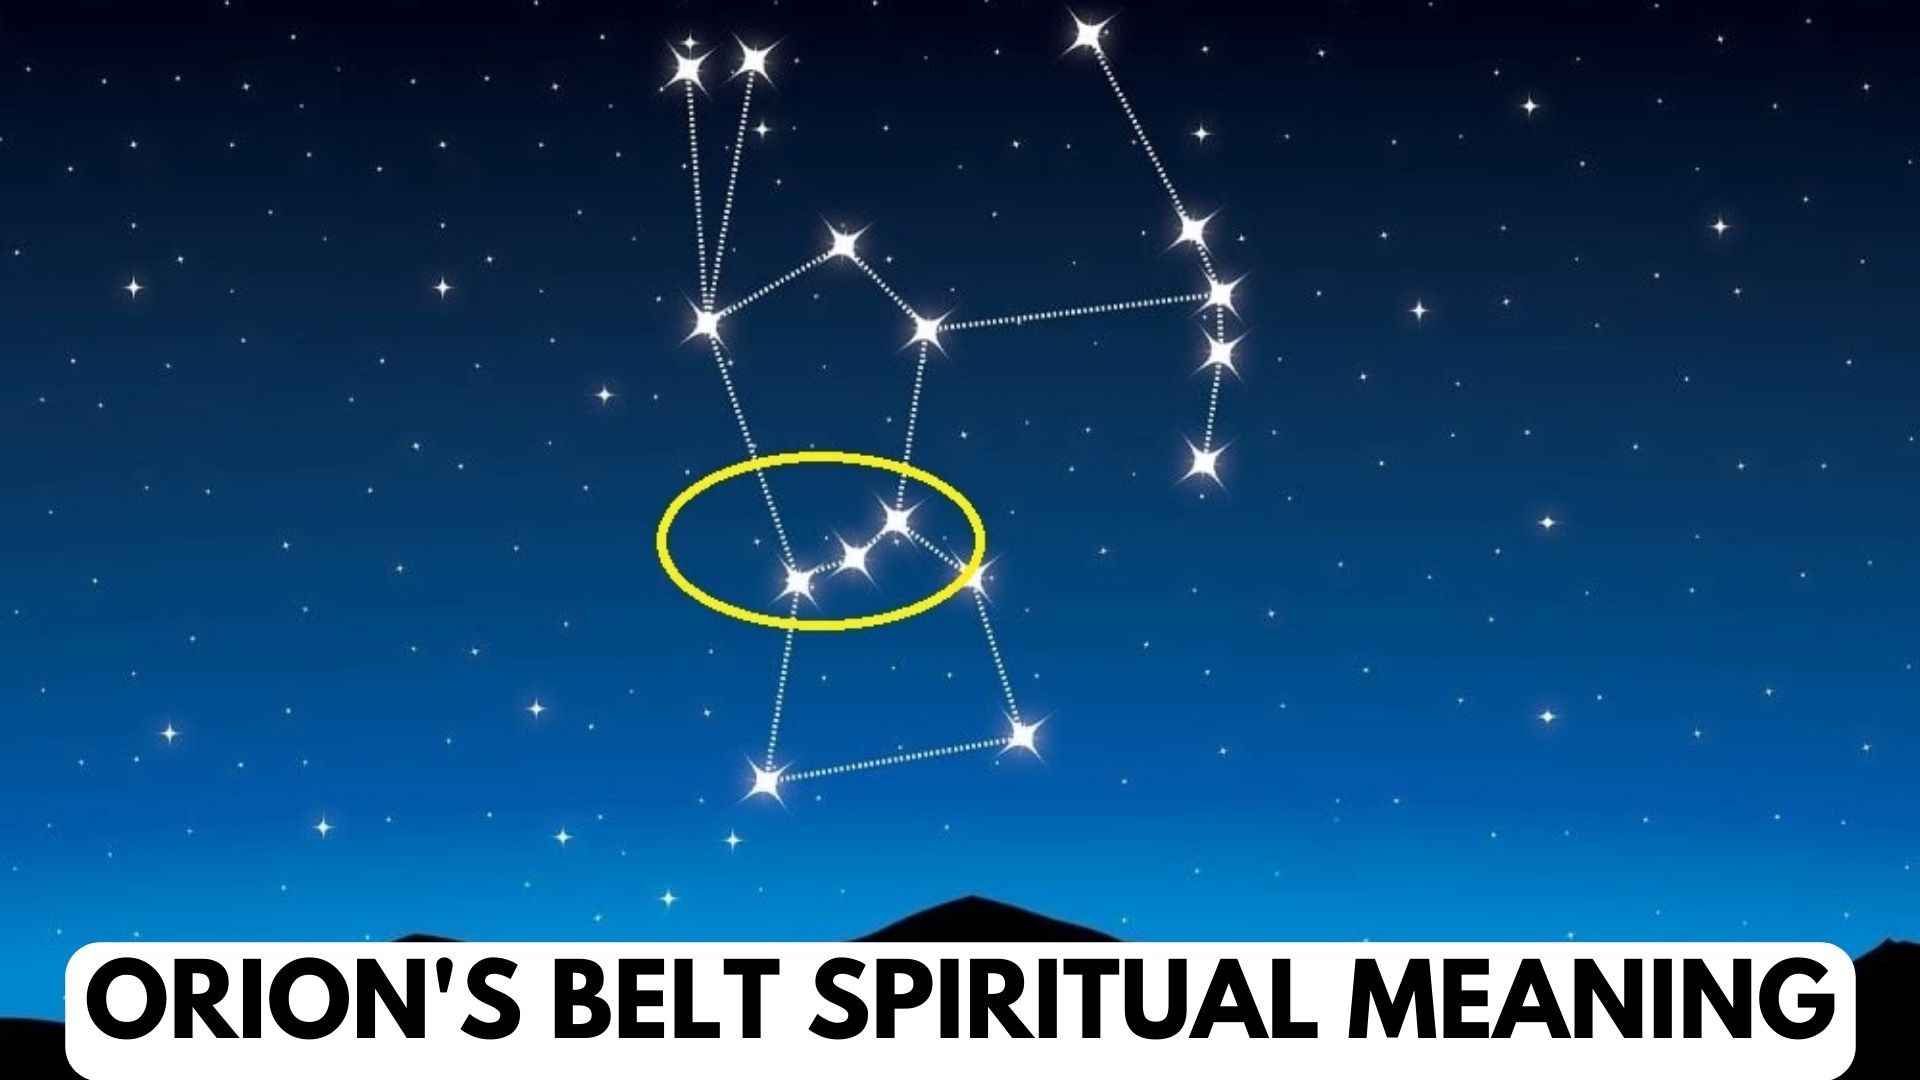 Orion's Belt Spiritual Meaning - A Symbol Of Strength